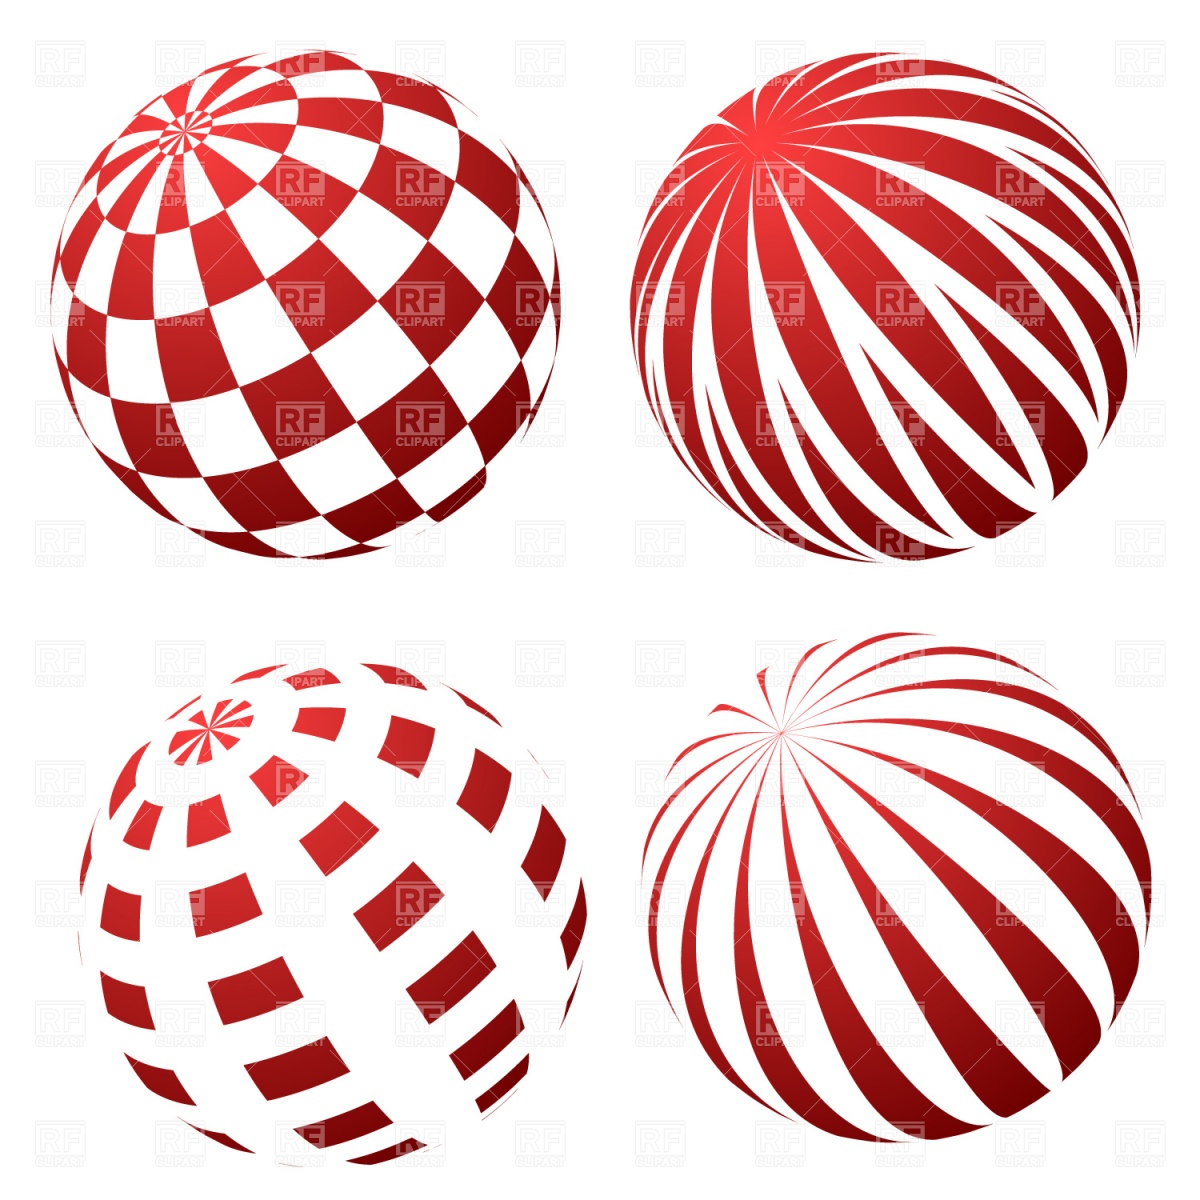 3d Spheres With Patterns 1253 Download Royalty Free Vector Clipart    